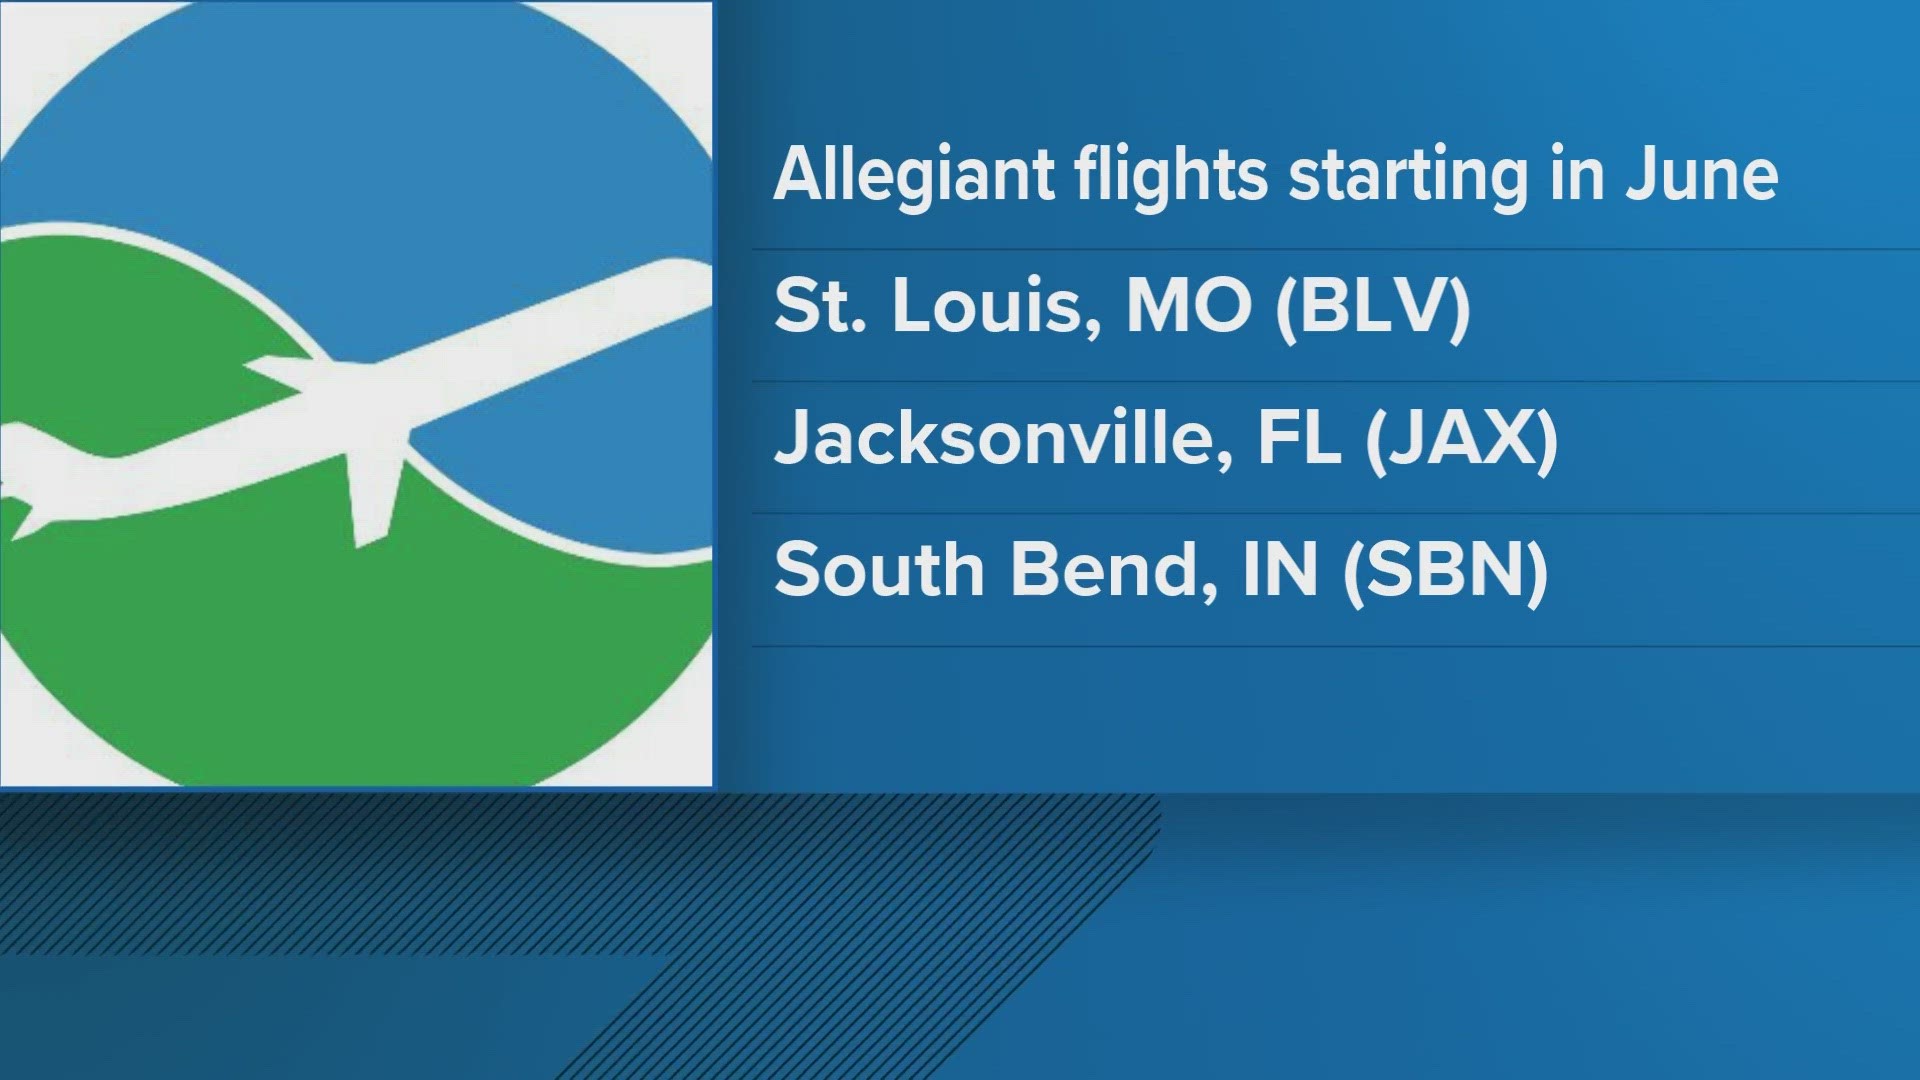 Starting in June Allegiant Air will offer nonstop service to St. Louis, Missouri, Jacksonville, Florida, and South Bend, Indiana